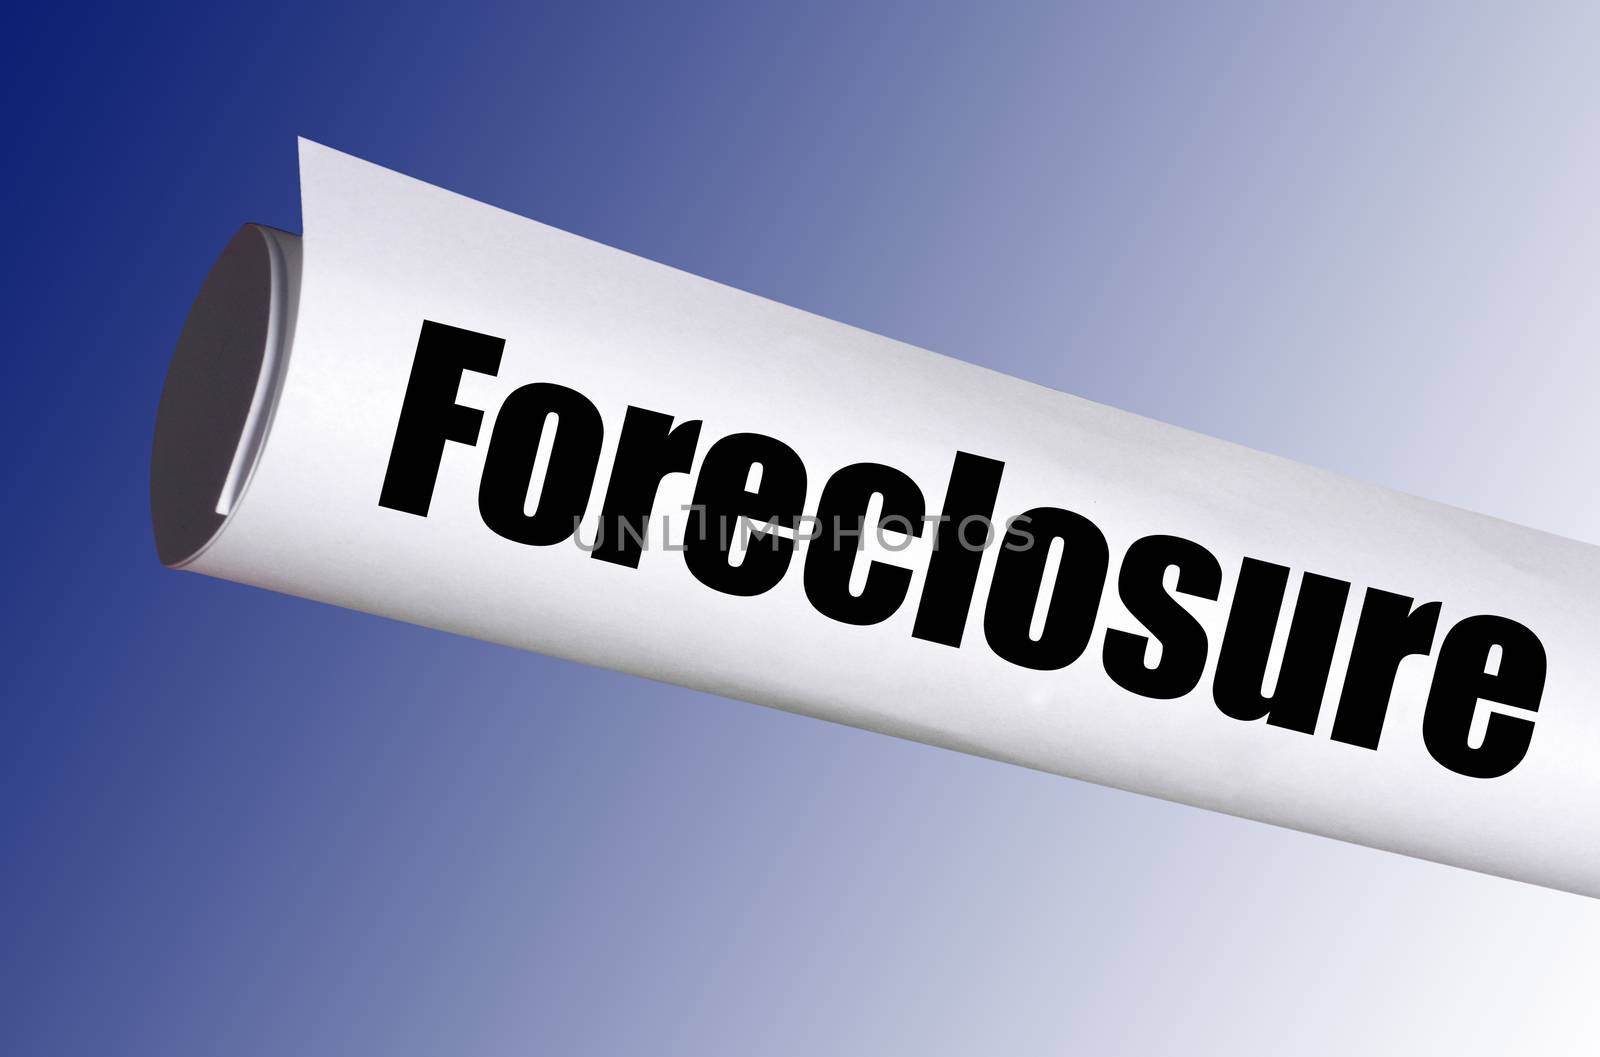 legal foreclosure notice on blue background